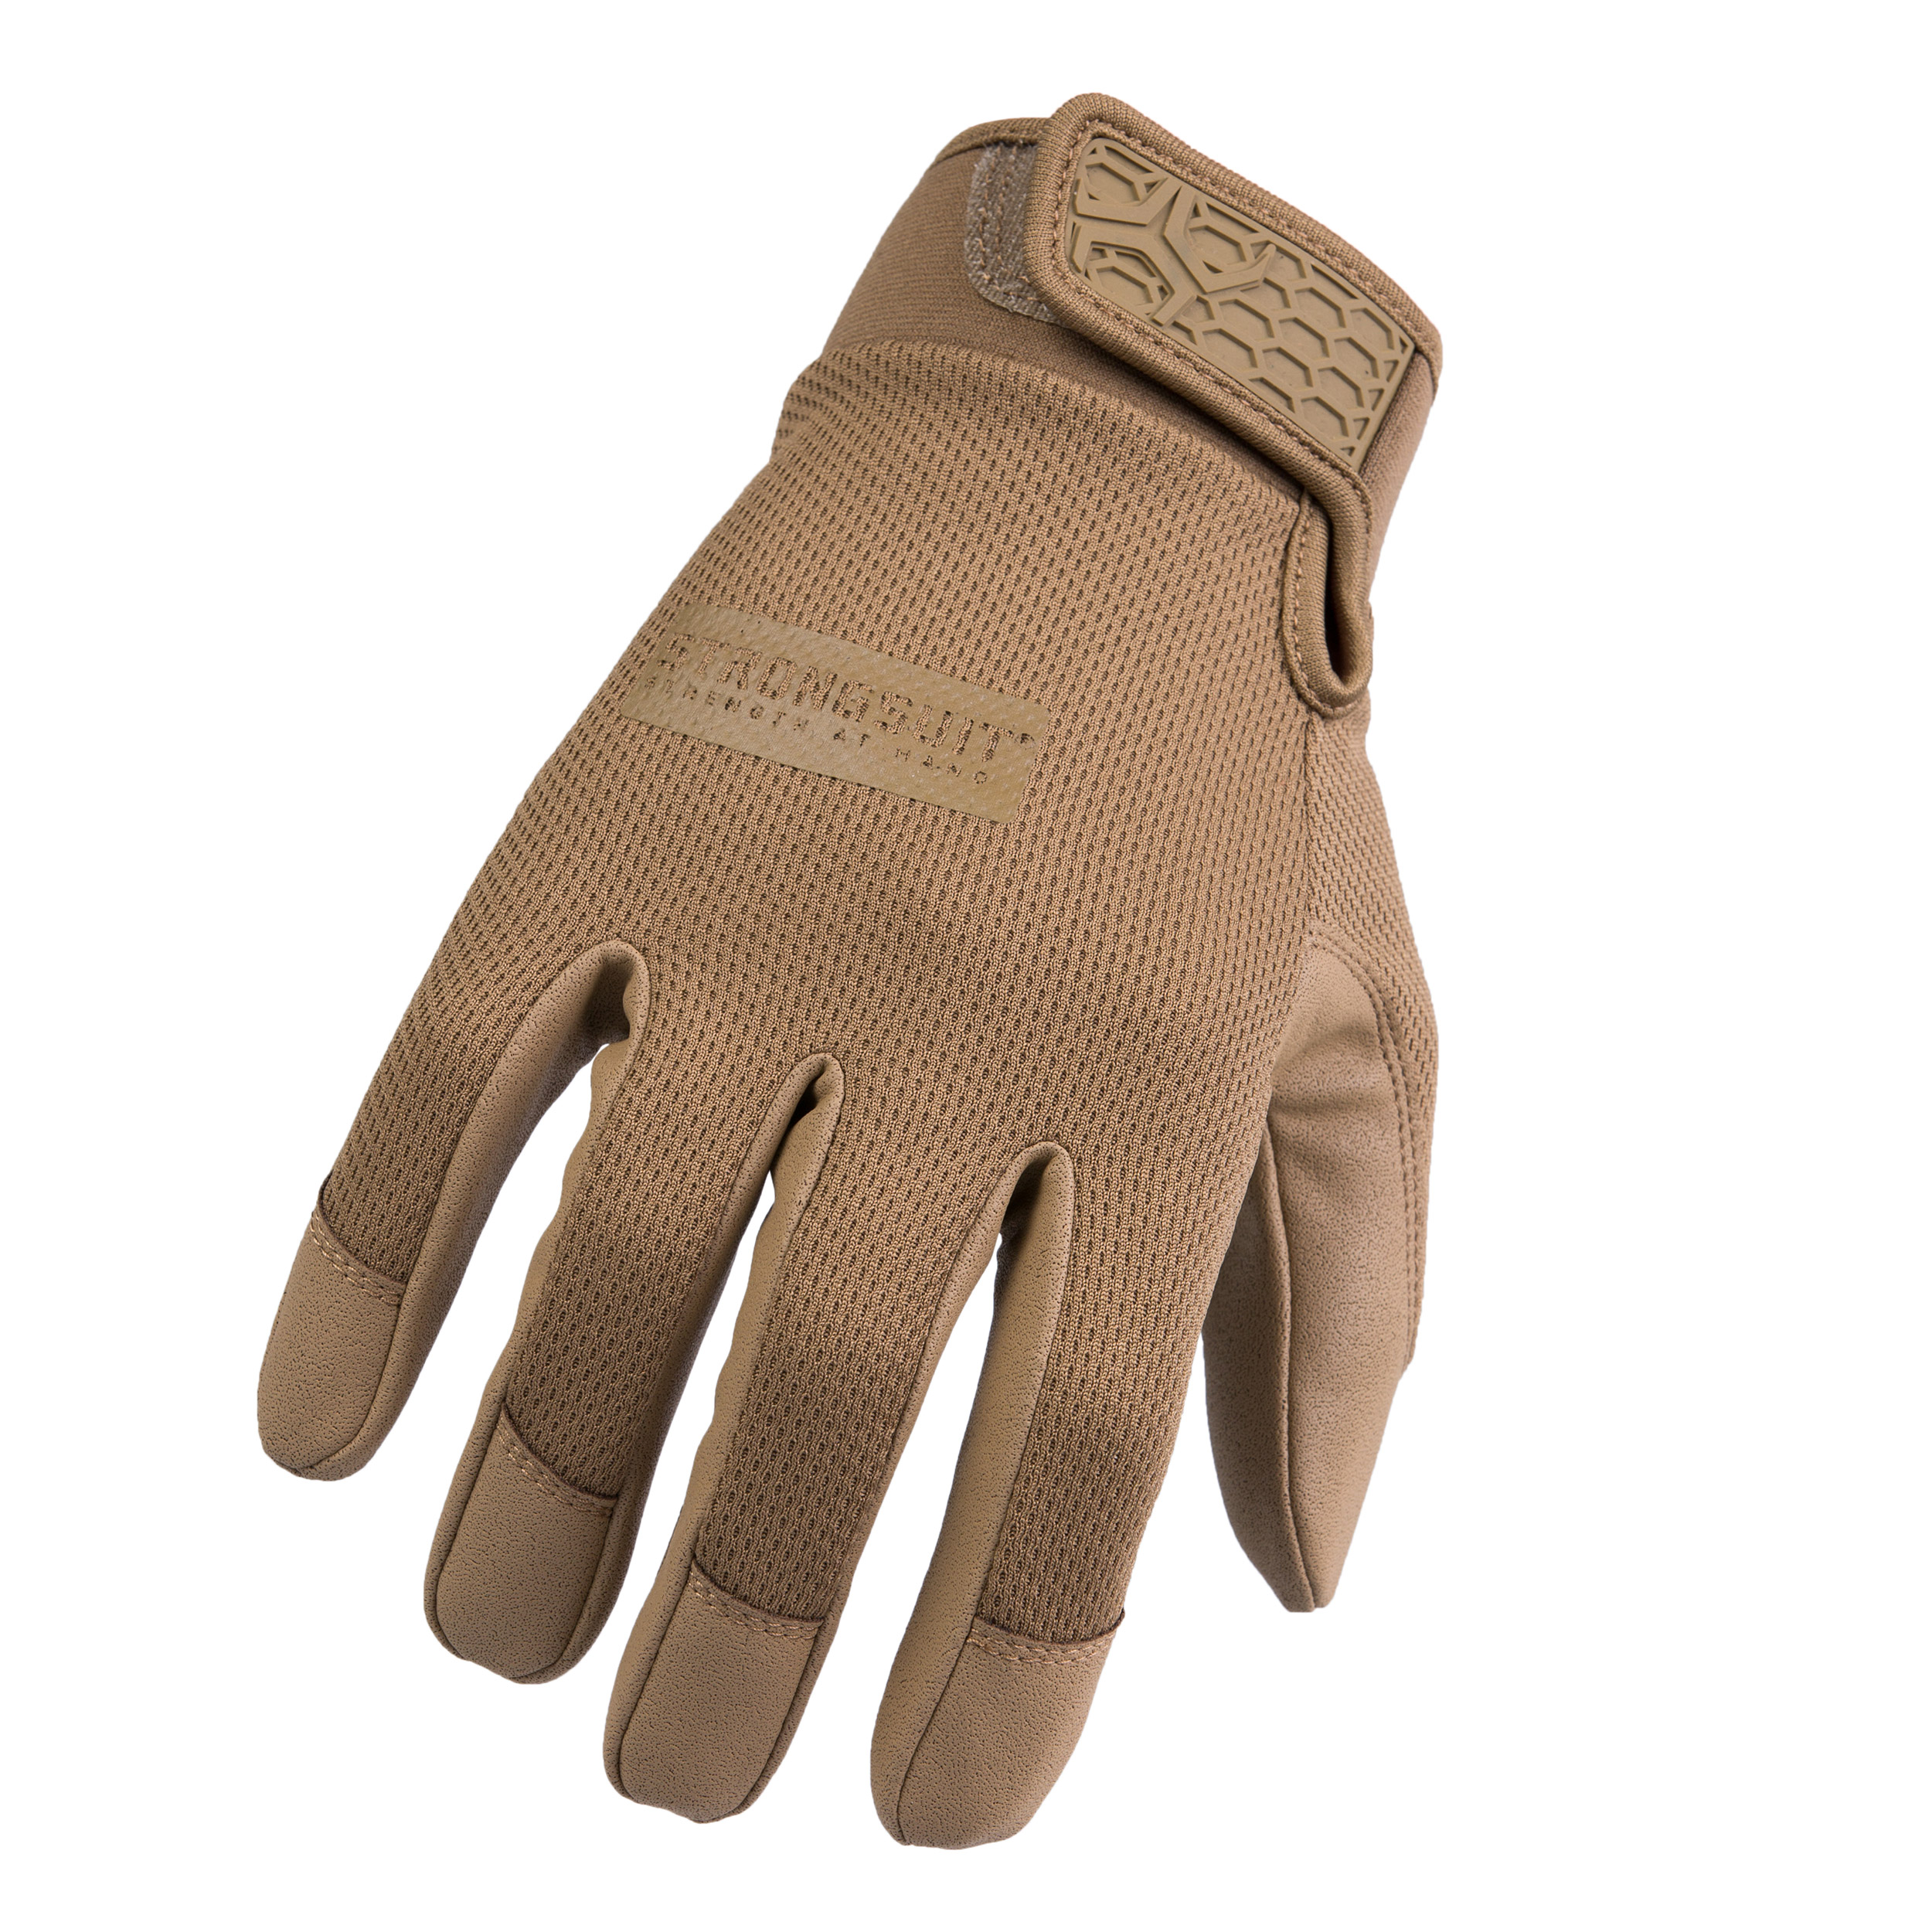 Second Skin Gloves Coyote Gloves Large